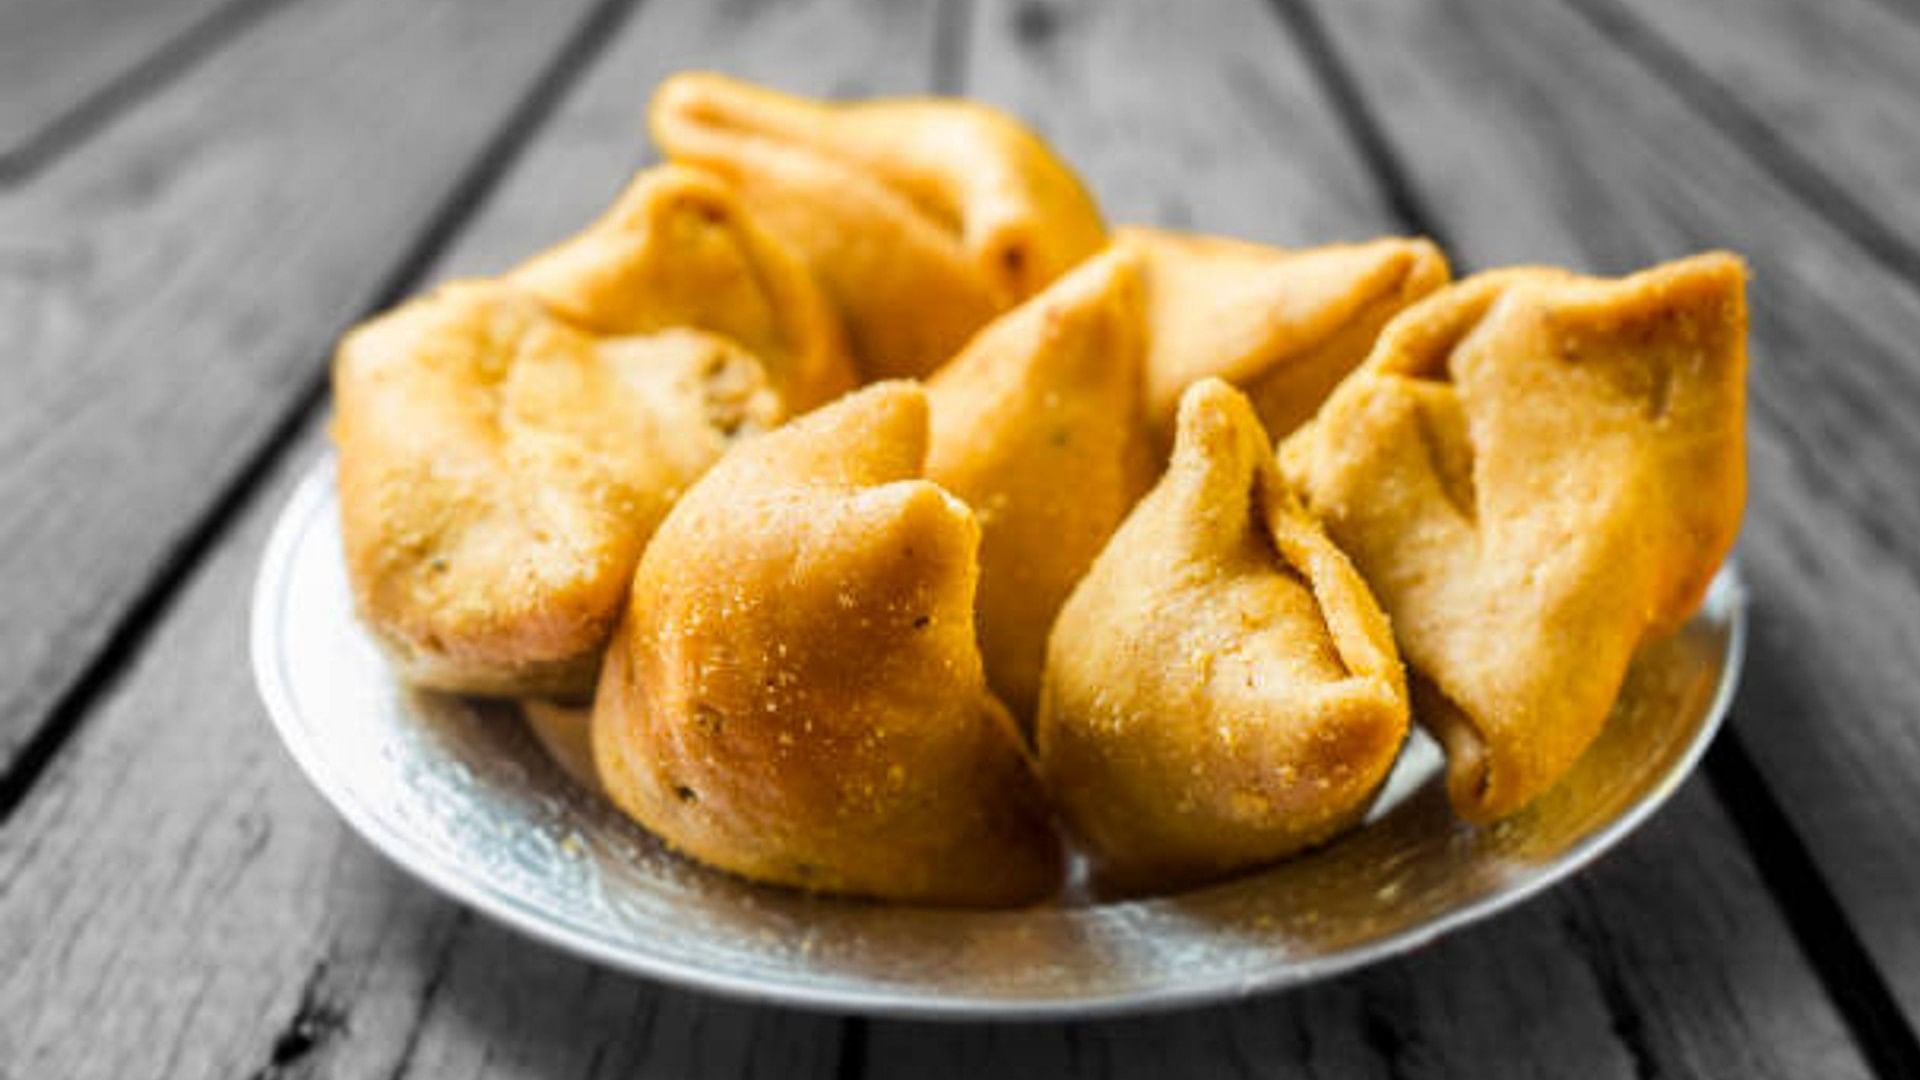 For three decades in this restaurant Samosa was being made in the toilet the officials raided